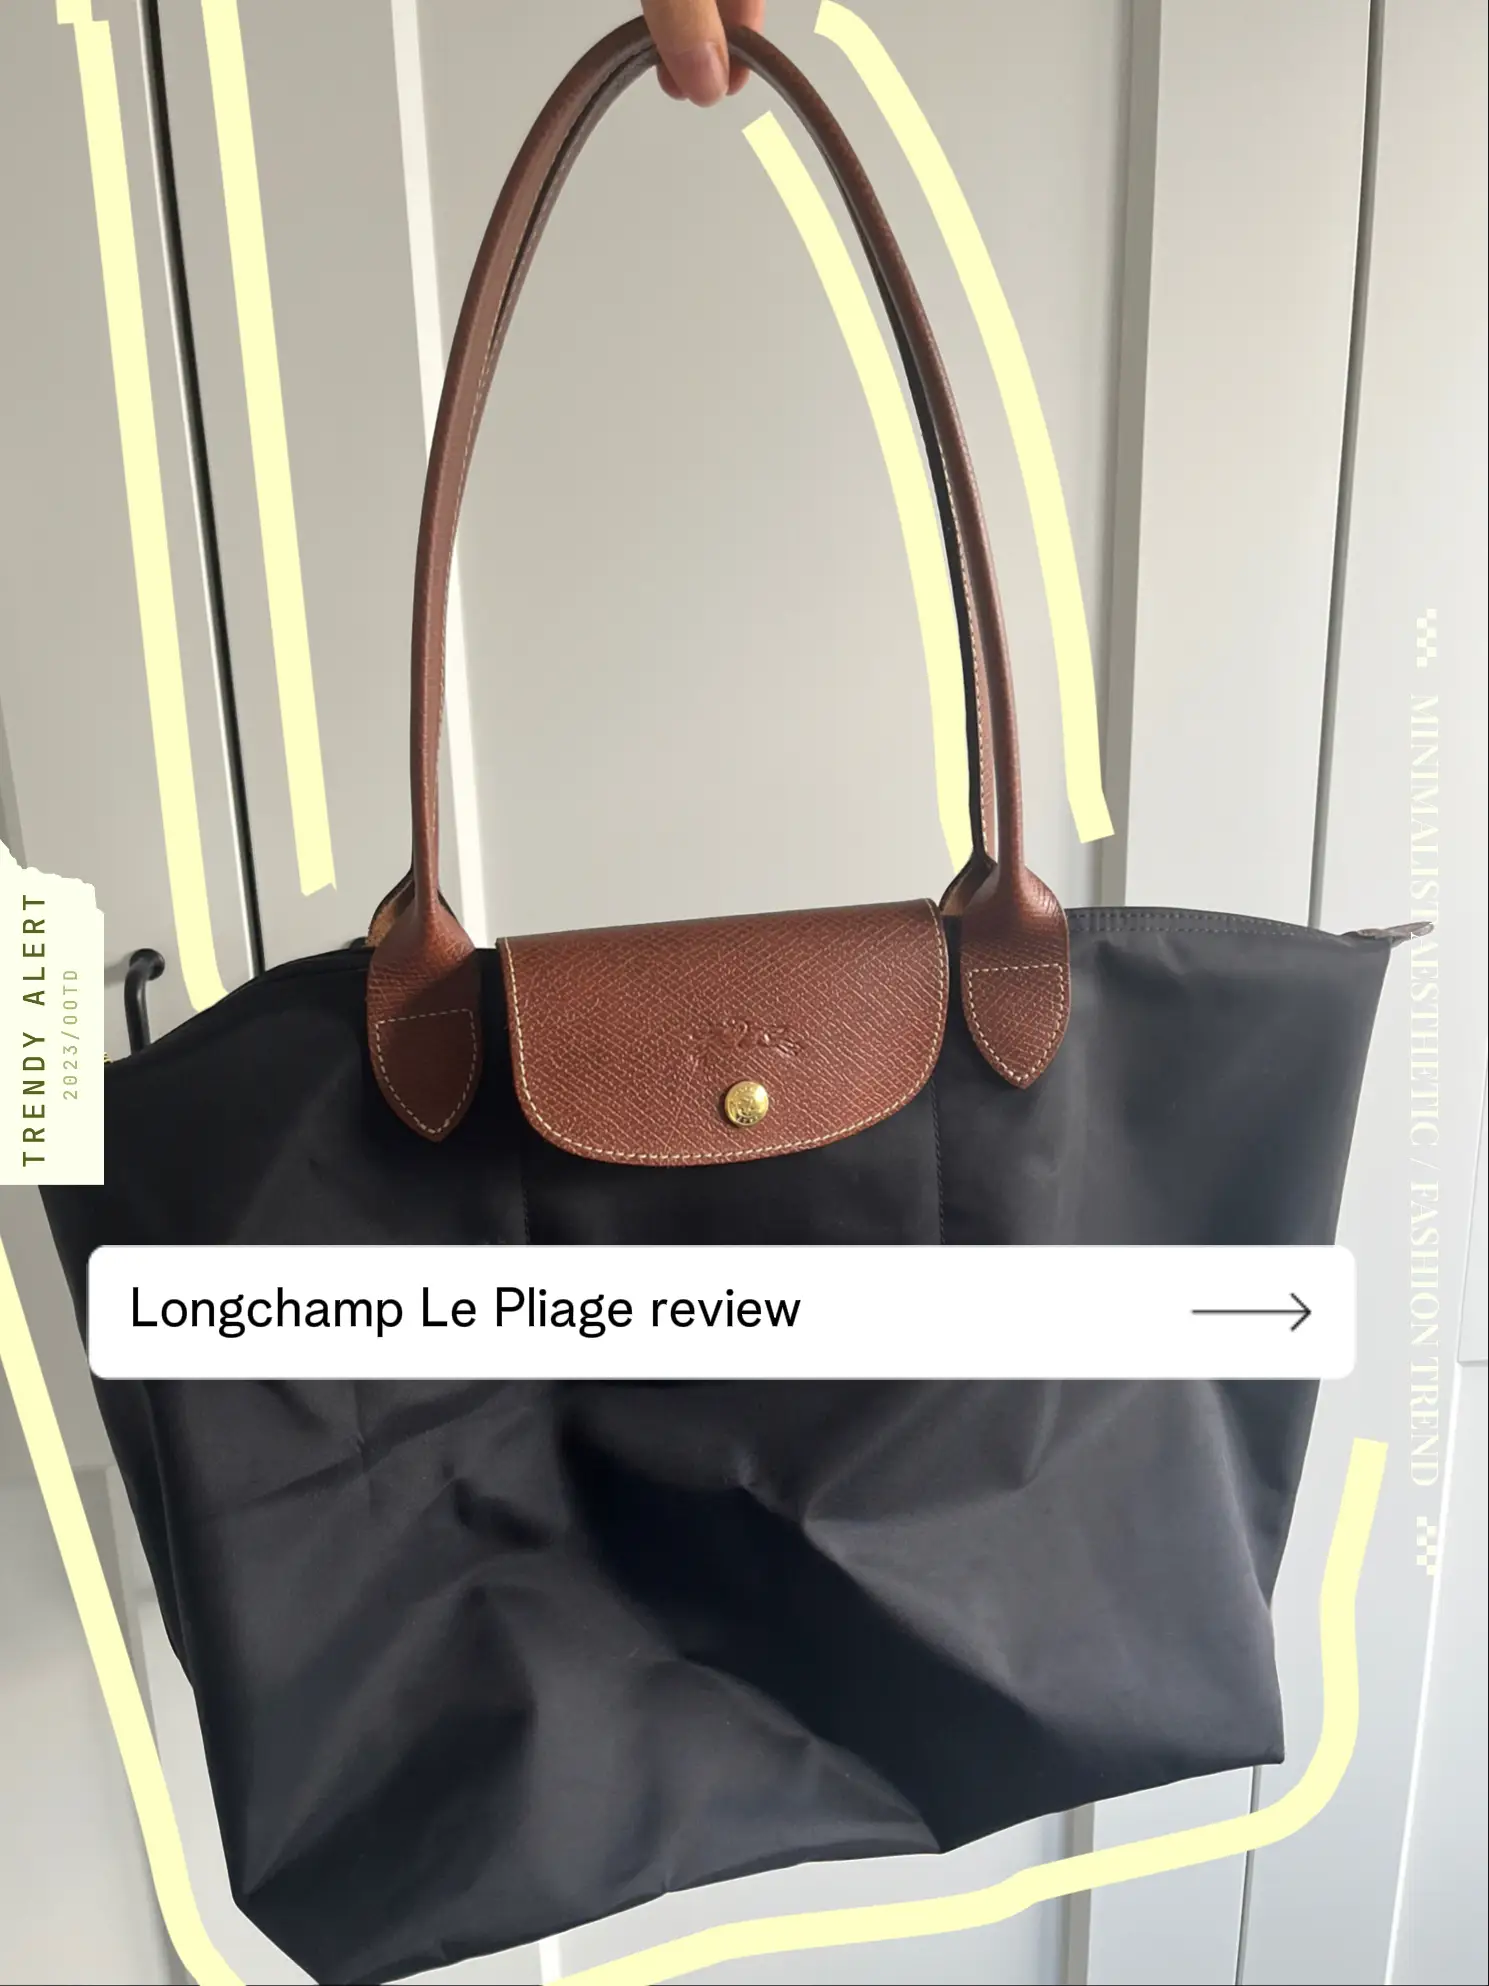 Le Pliage Longchamp Backpack Review: the Pros and Cons